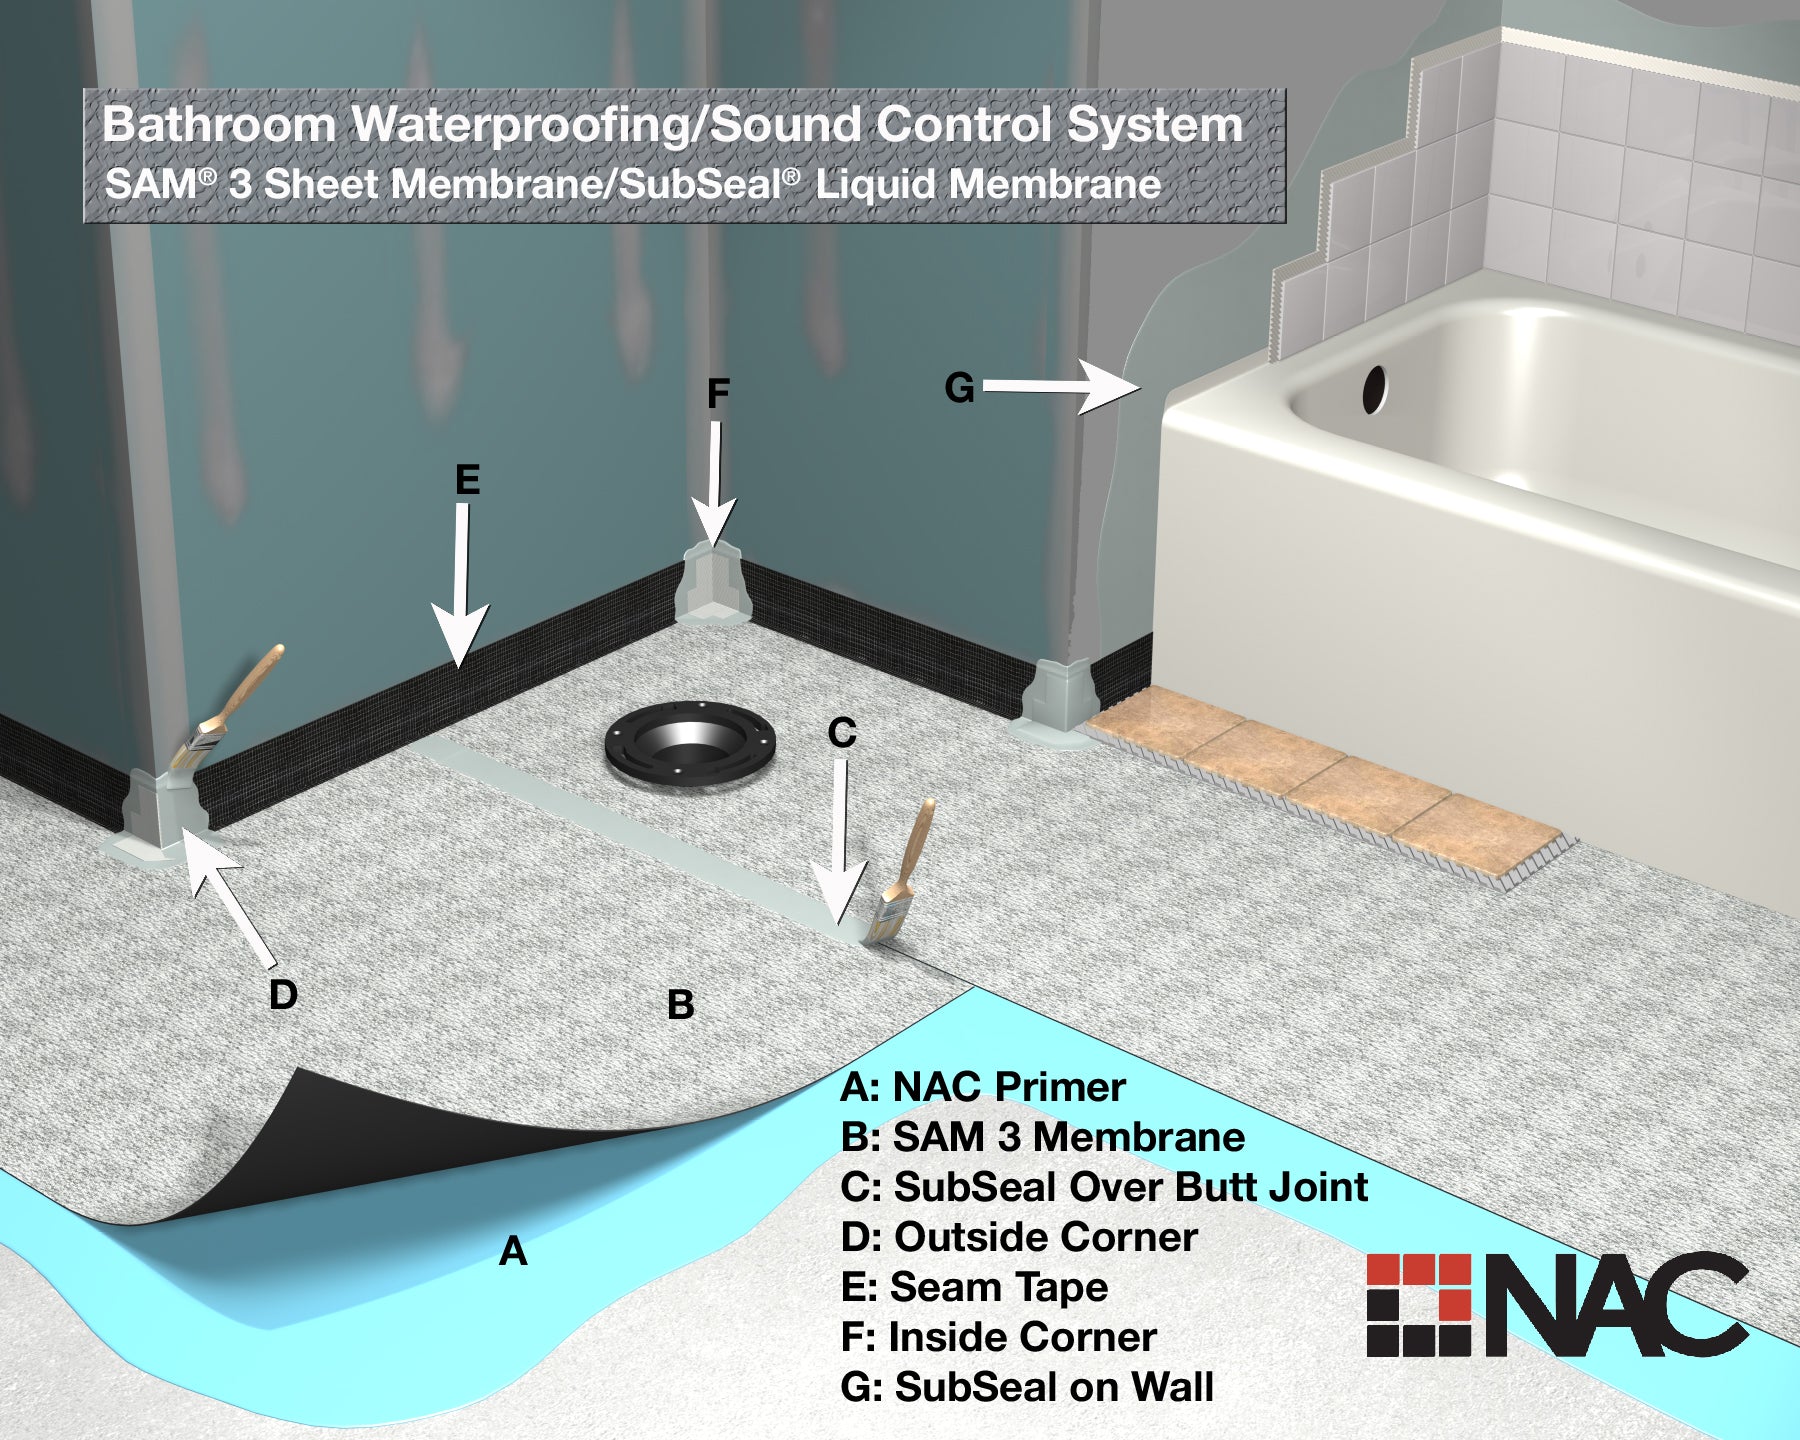 Full bathroom system integrates SAM 3, SubSeal, seam tape and pre-formed fabric corners for projects requiring sound control and waterproofing protection.